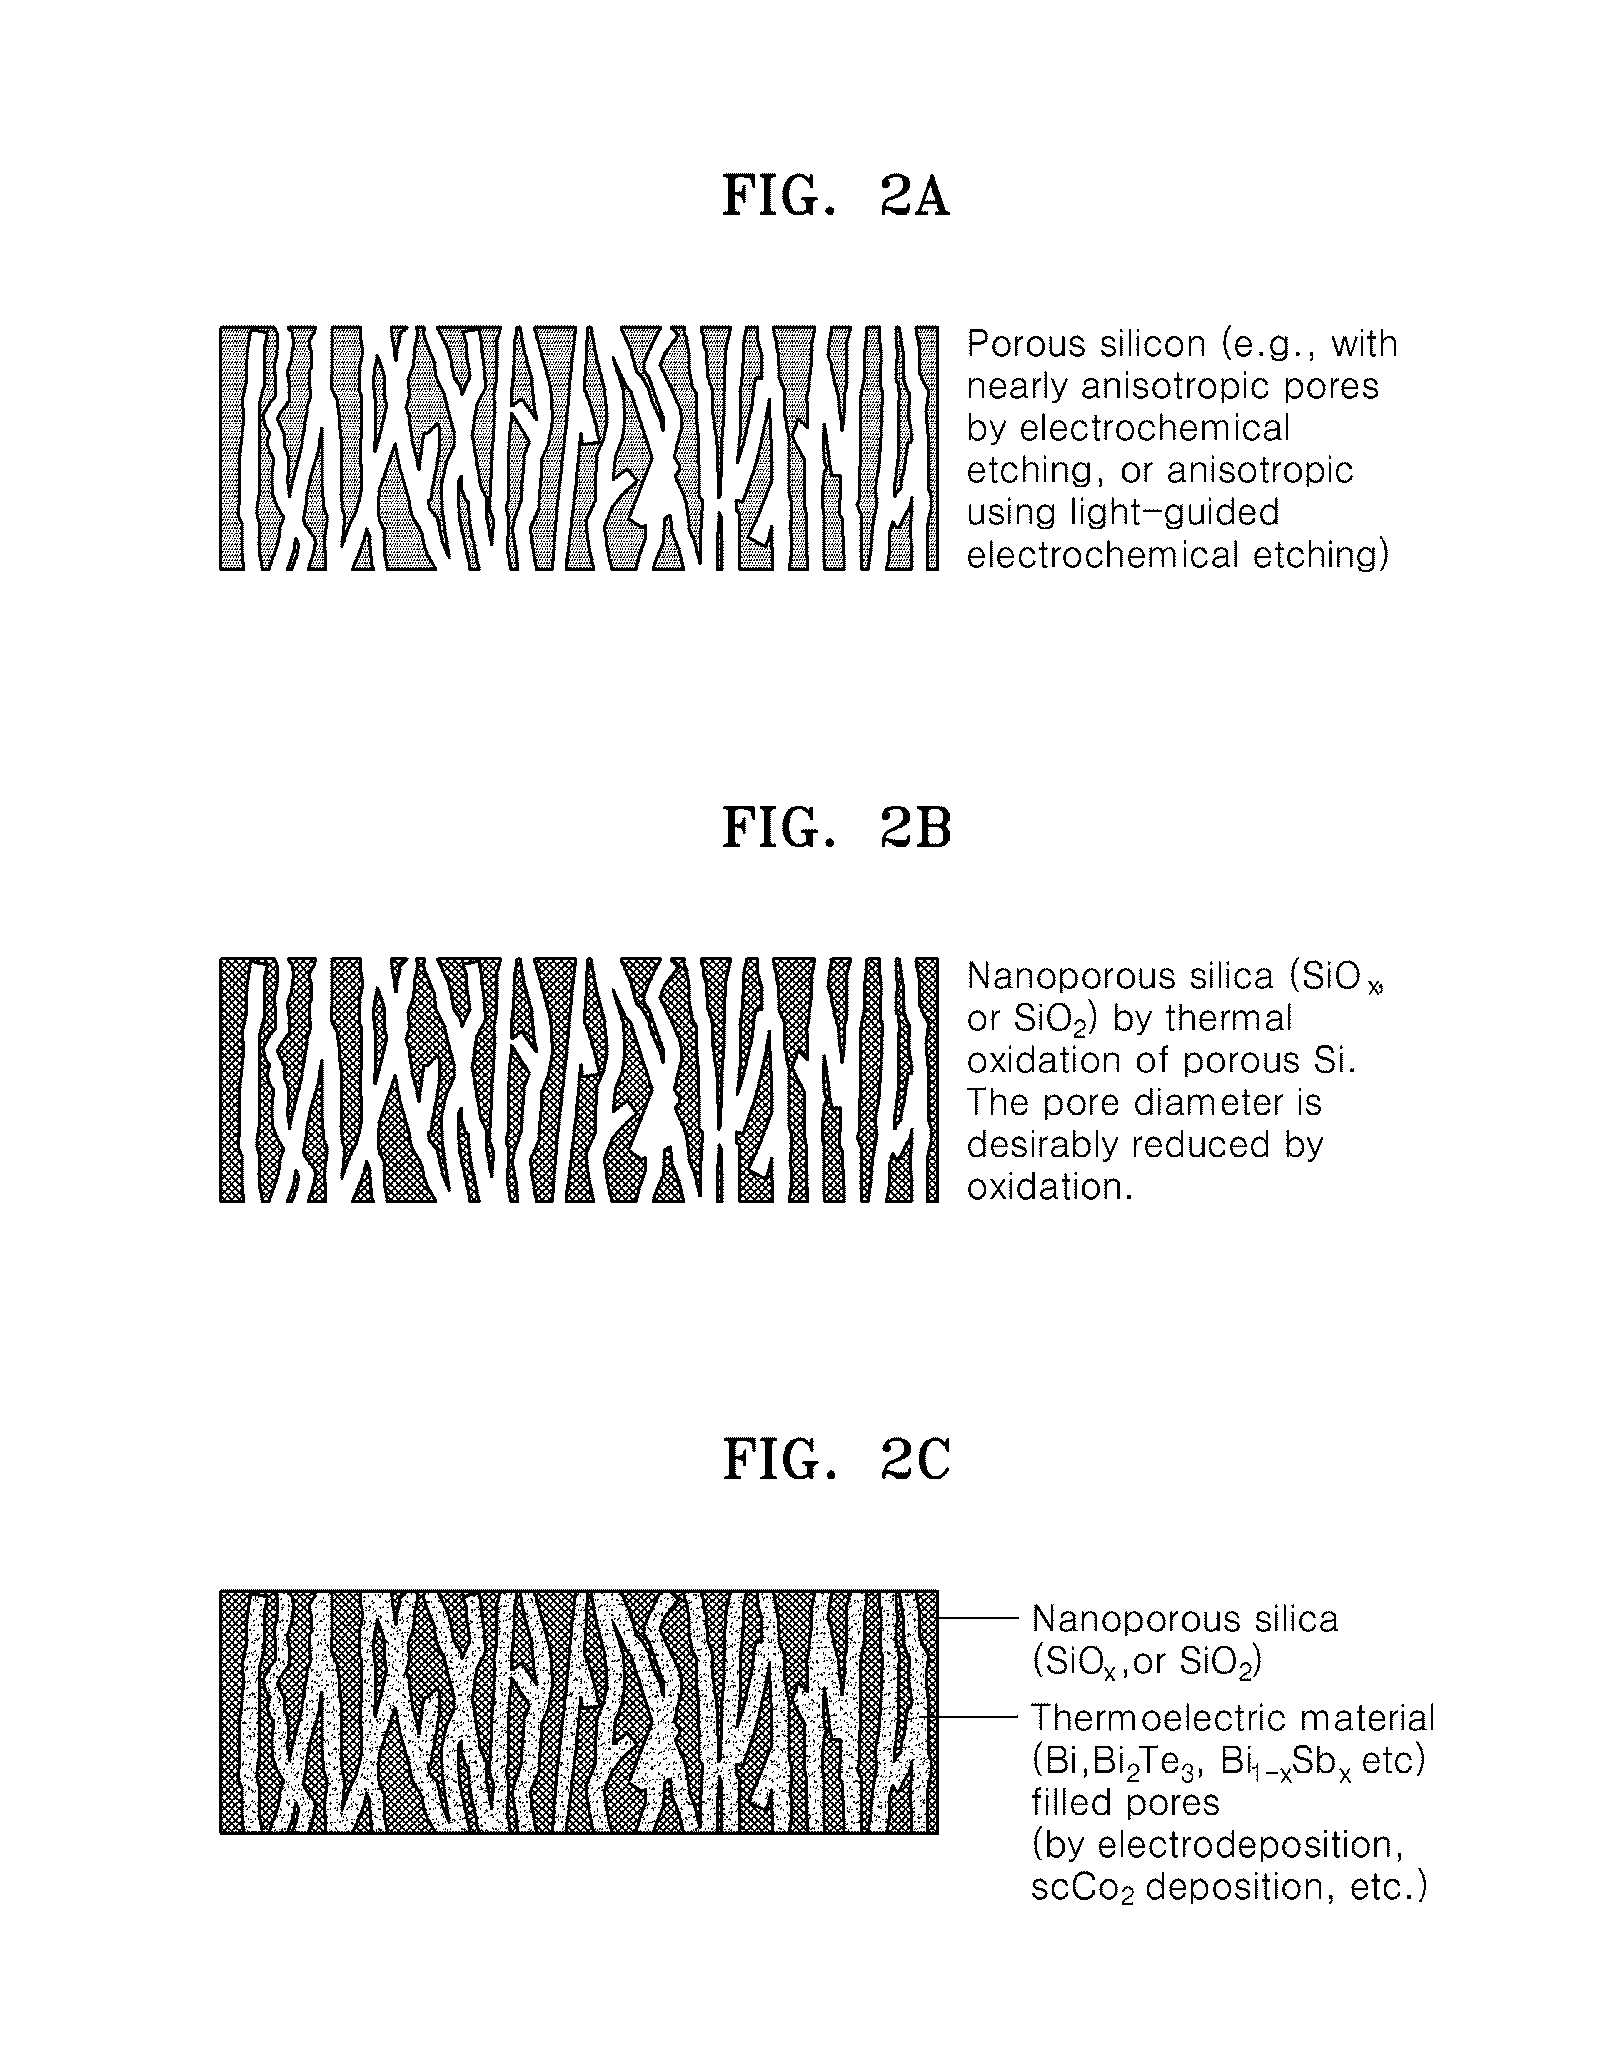 Anisotropically elongated thermoelectric material, process for preparing the same, and device comprising the material